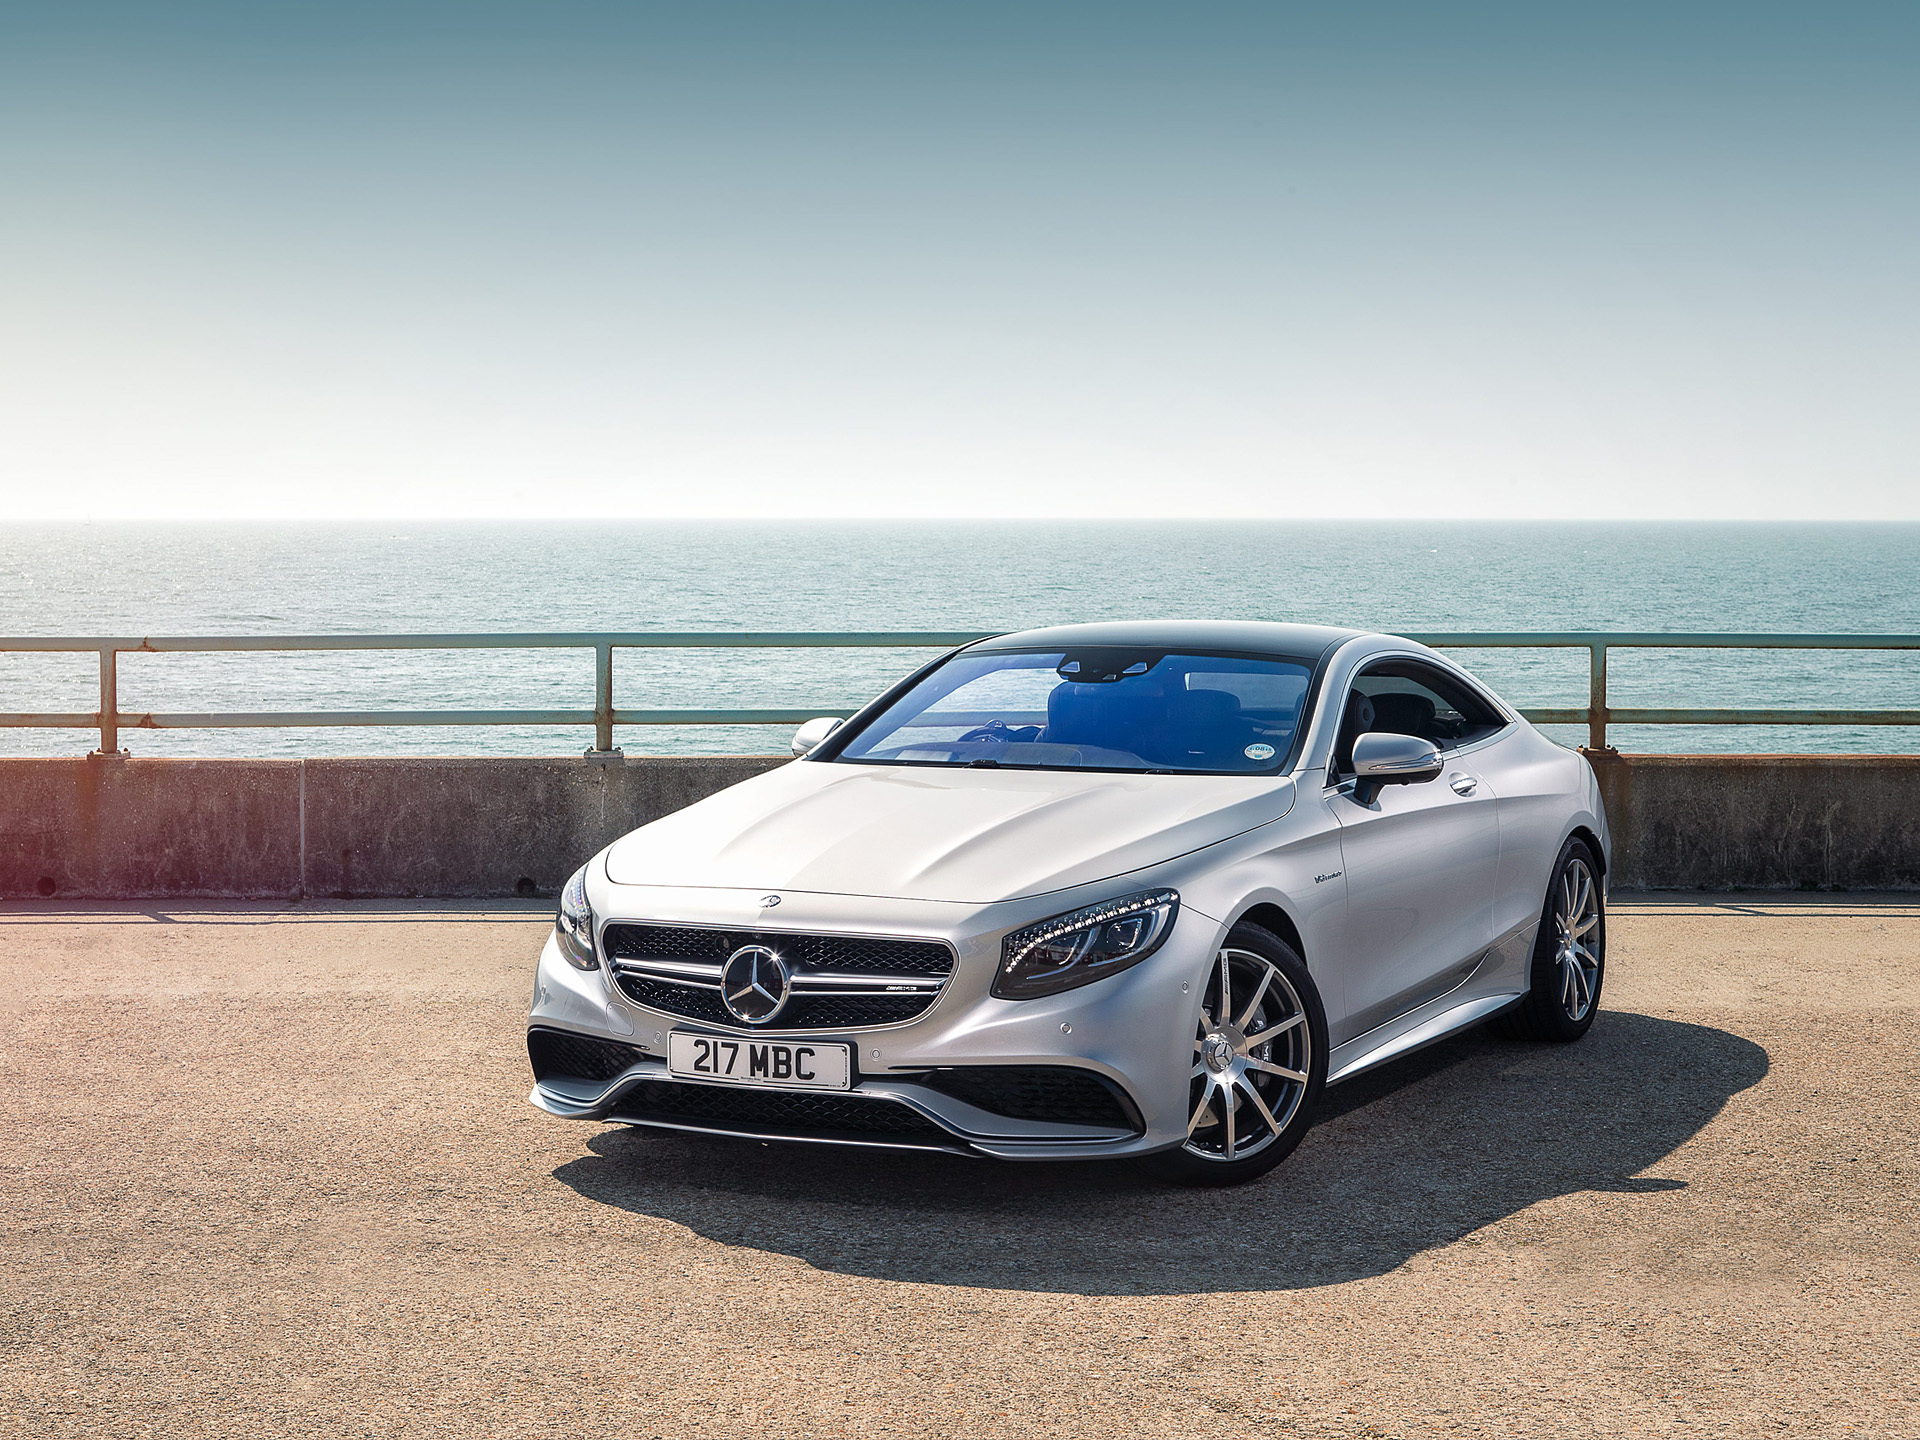  2015 Mercedes-Benz S63 AMG Coupe Wallpaper.